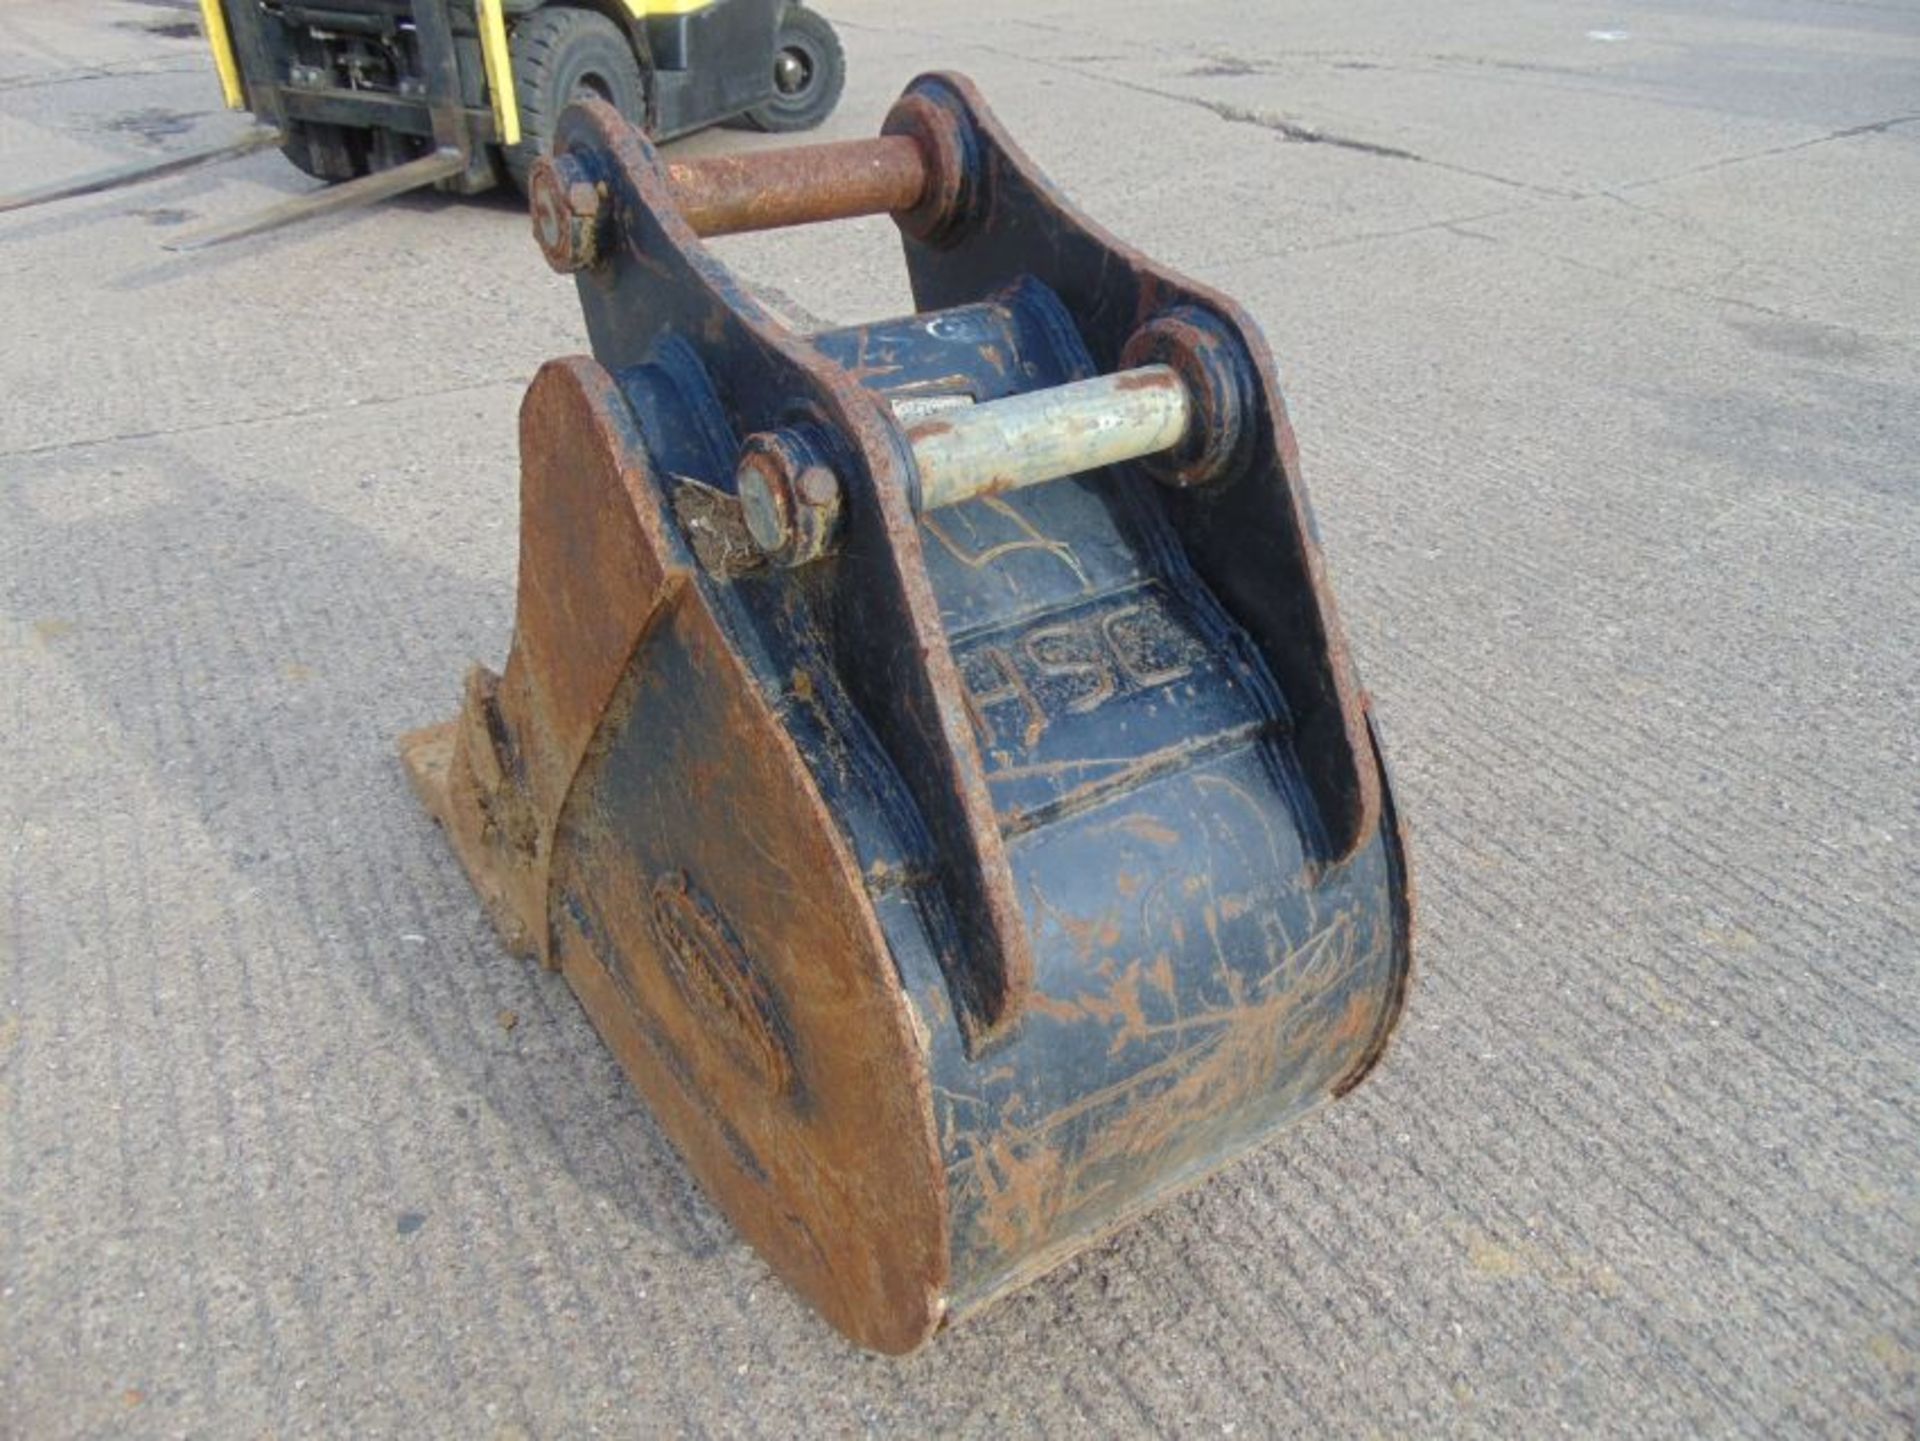 Strickland 23" Digging Bucket 65mm Pin to suit 13 Ton Excavator - Image 4 of 7